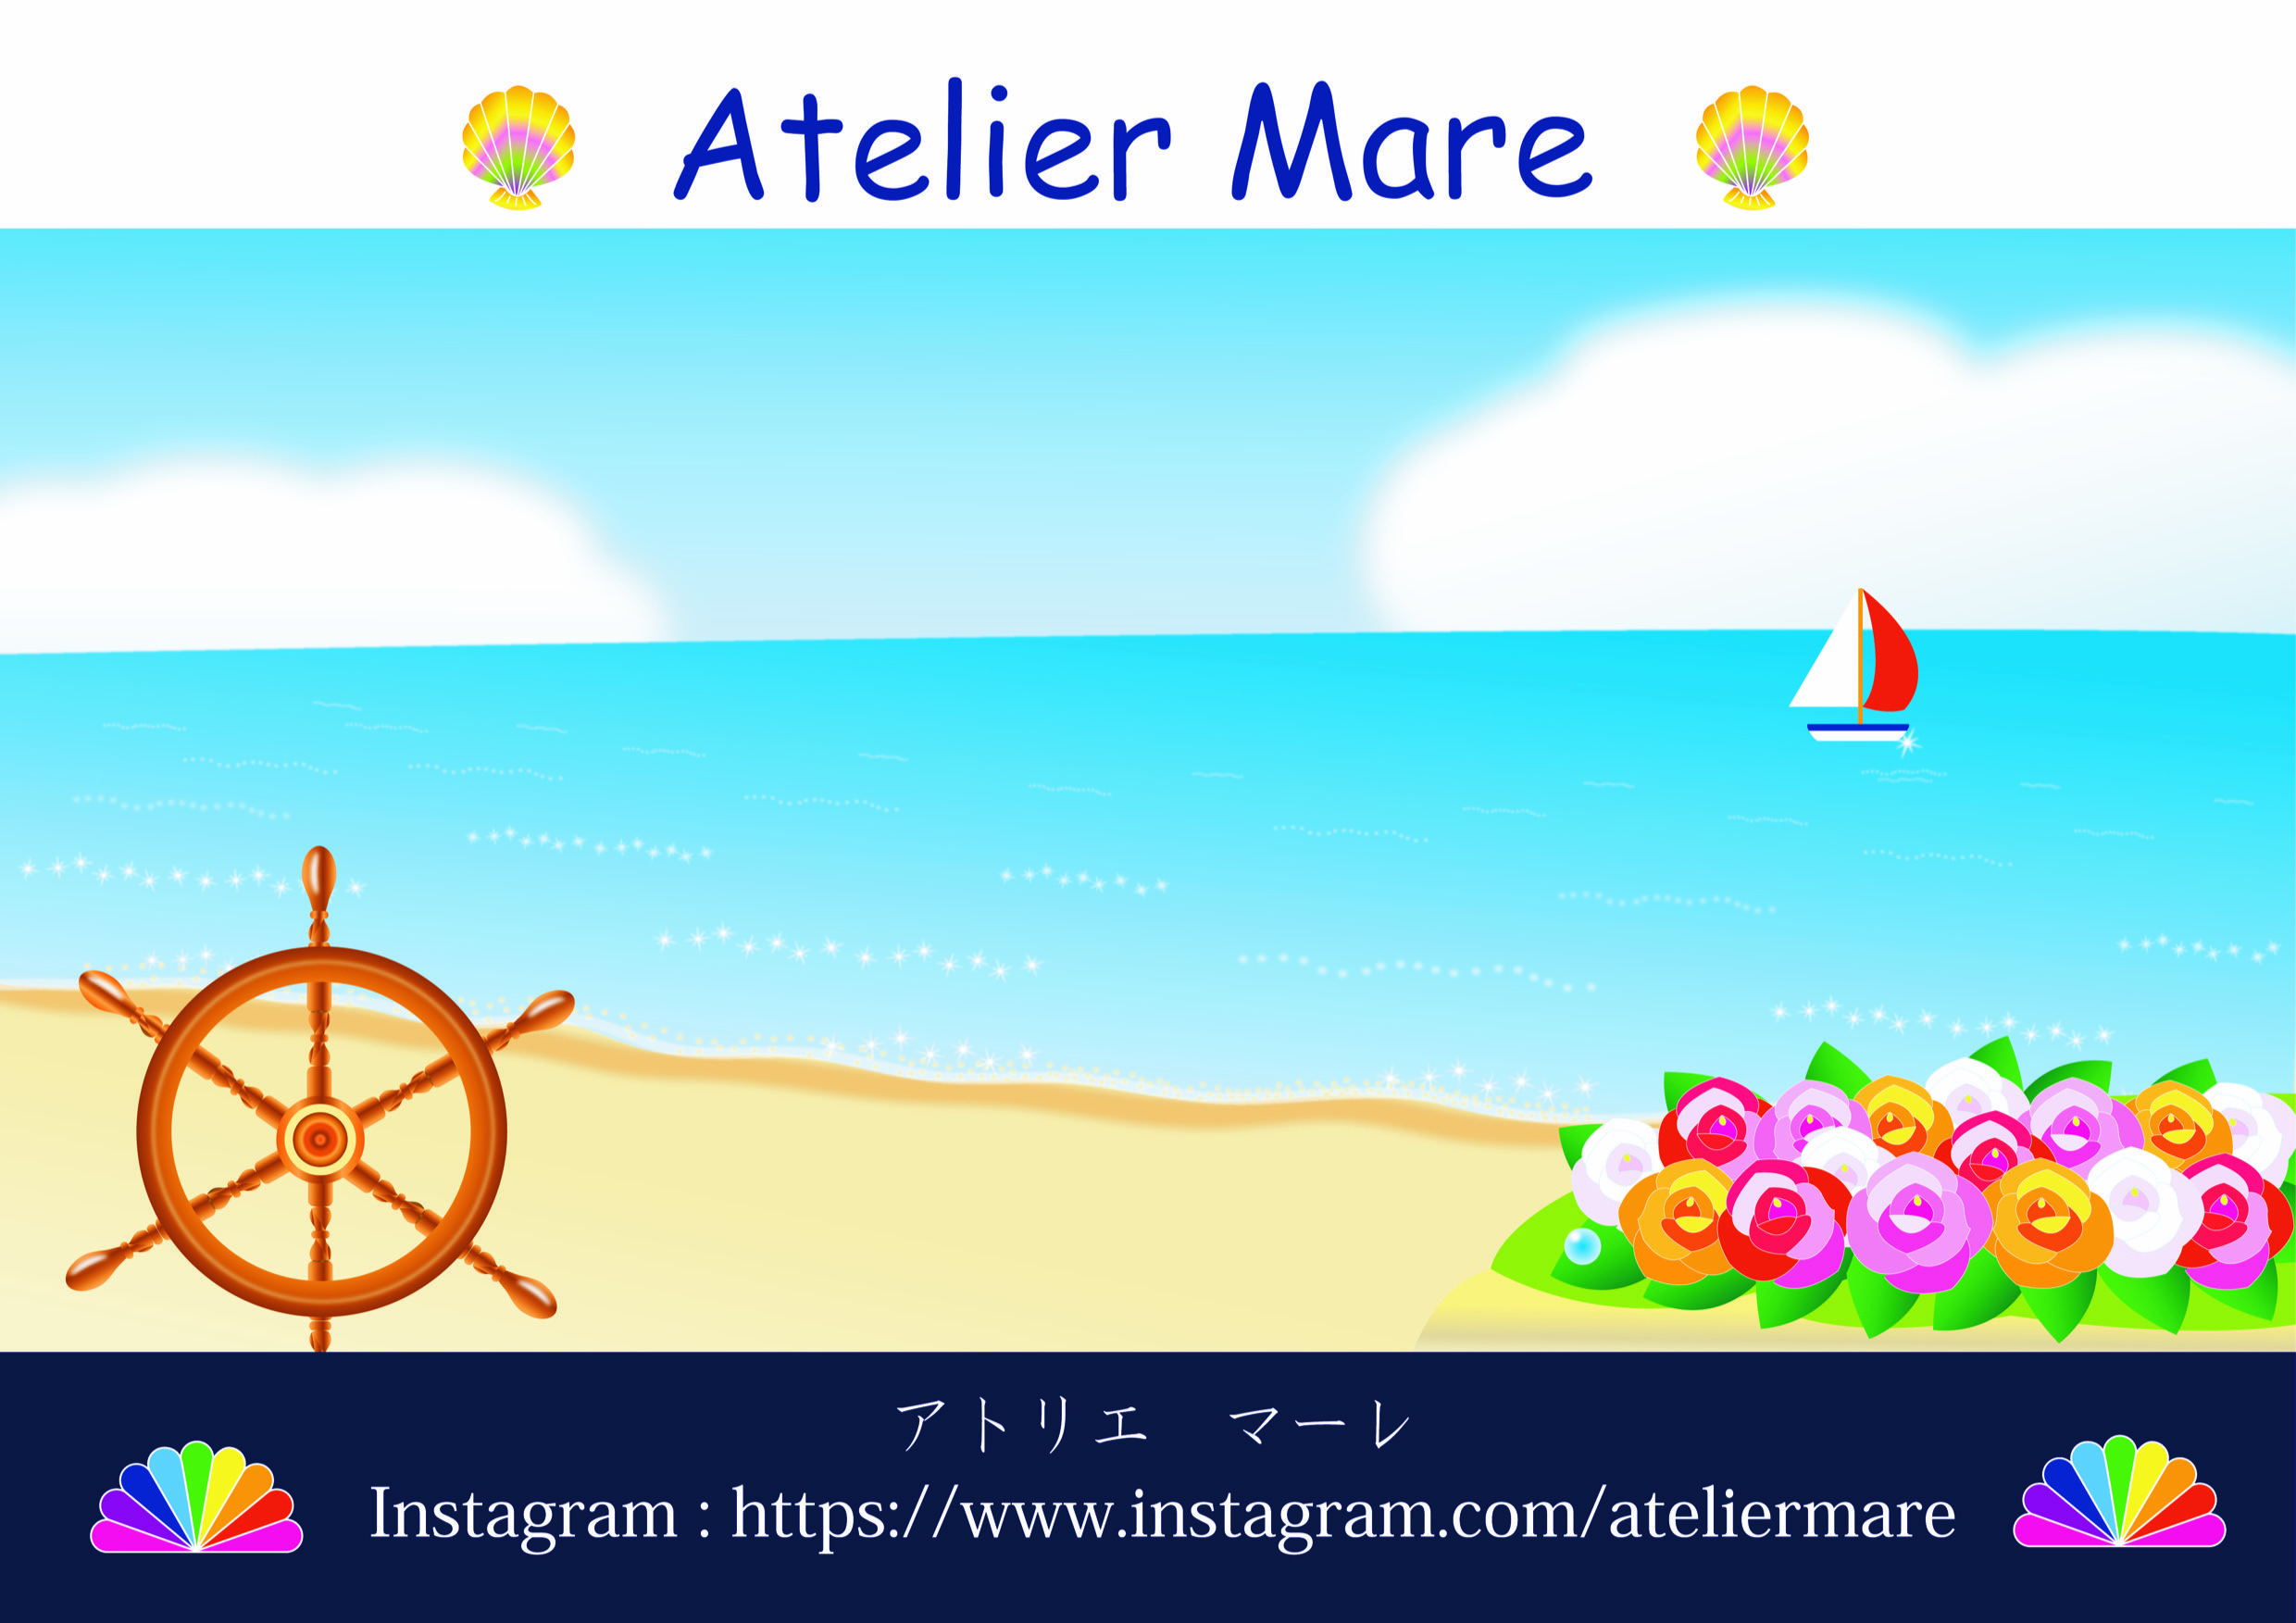 Aelier Mare（アトリエ　マーレ）